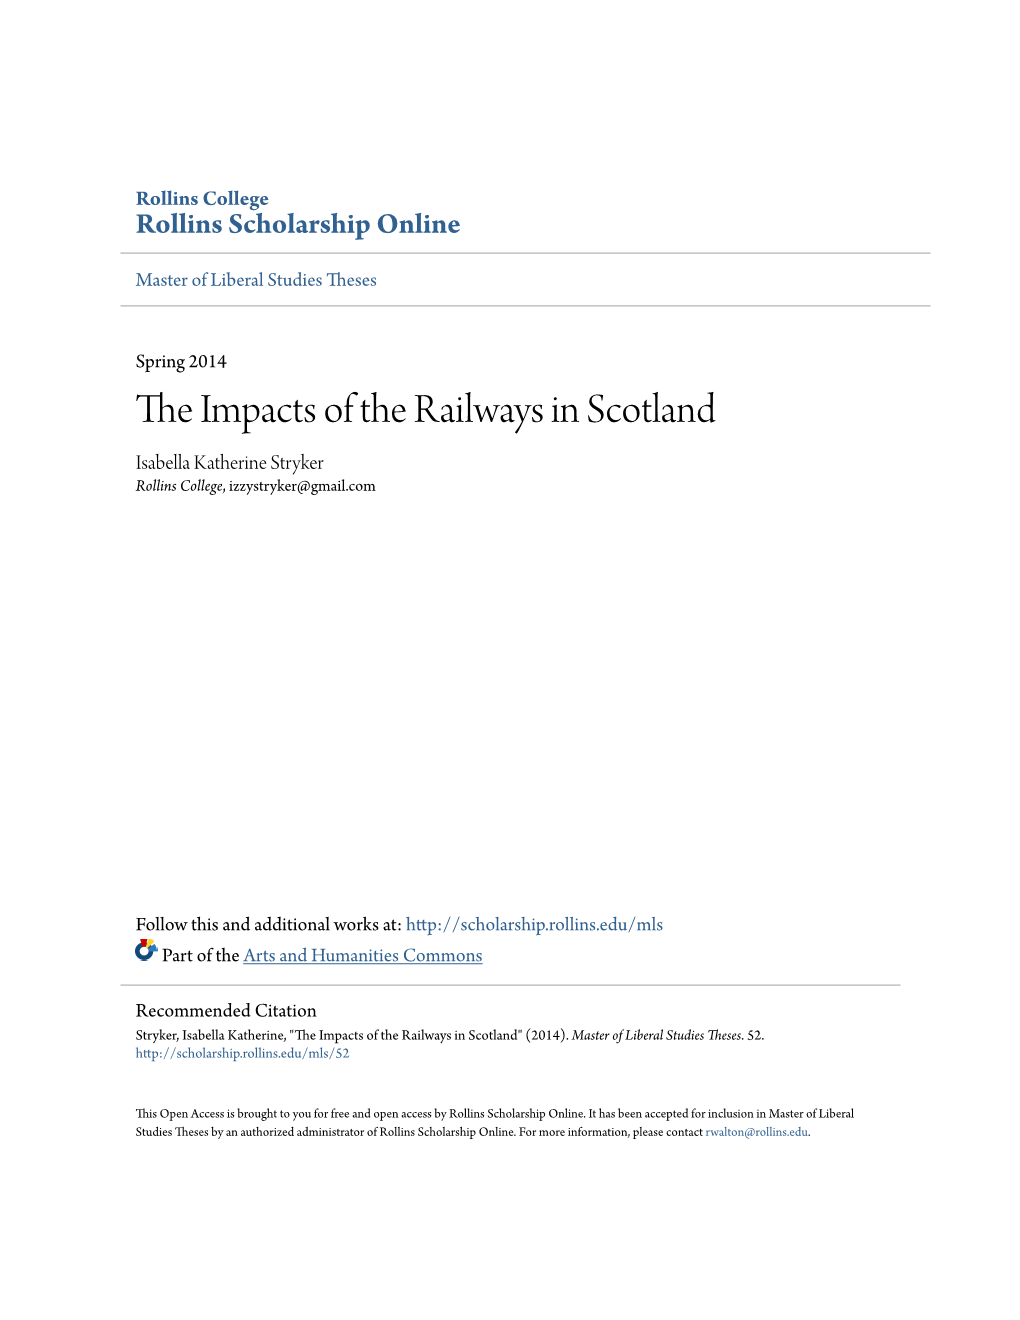 The Impacts of the Railways in Scotland